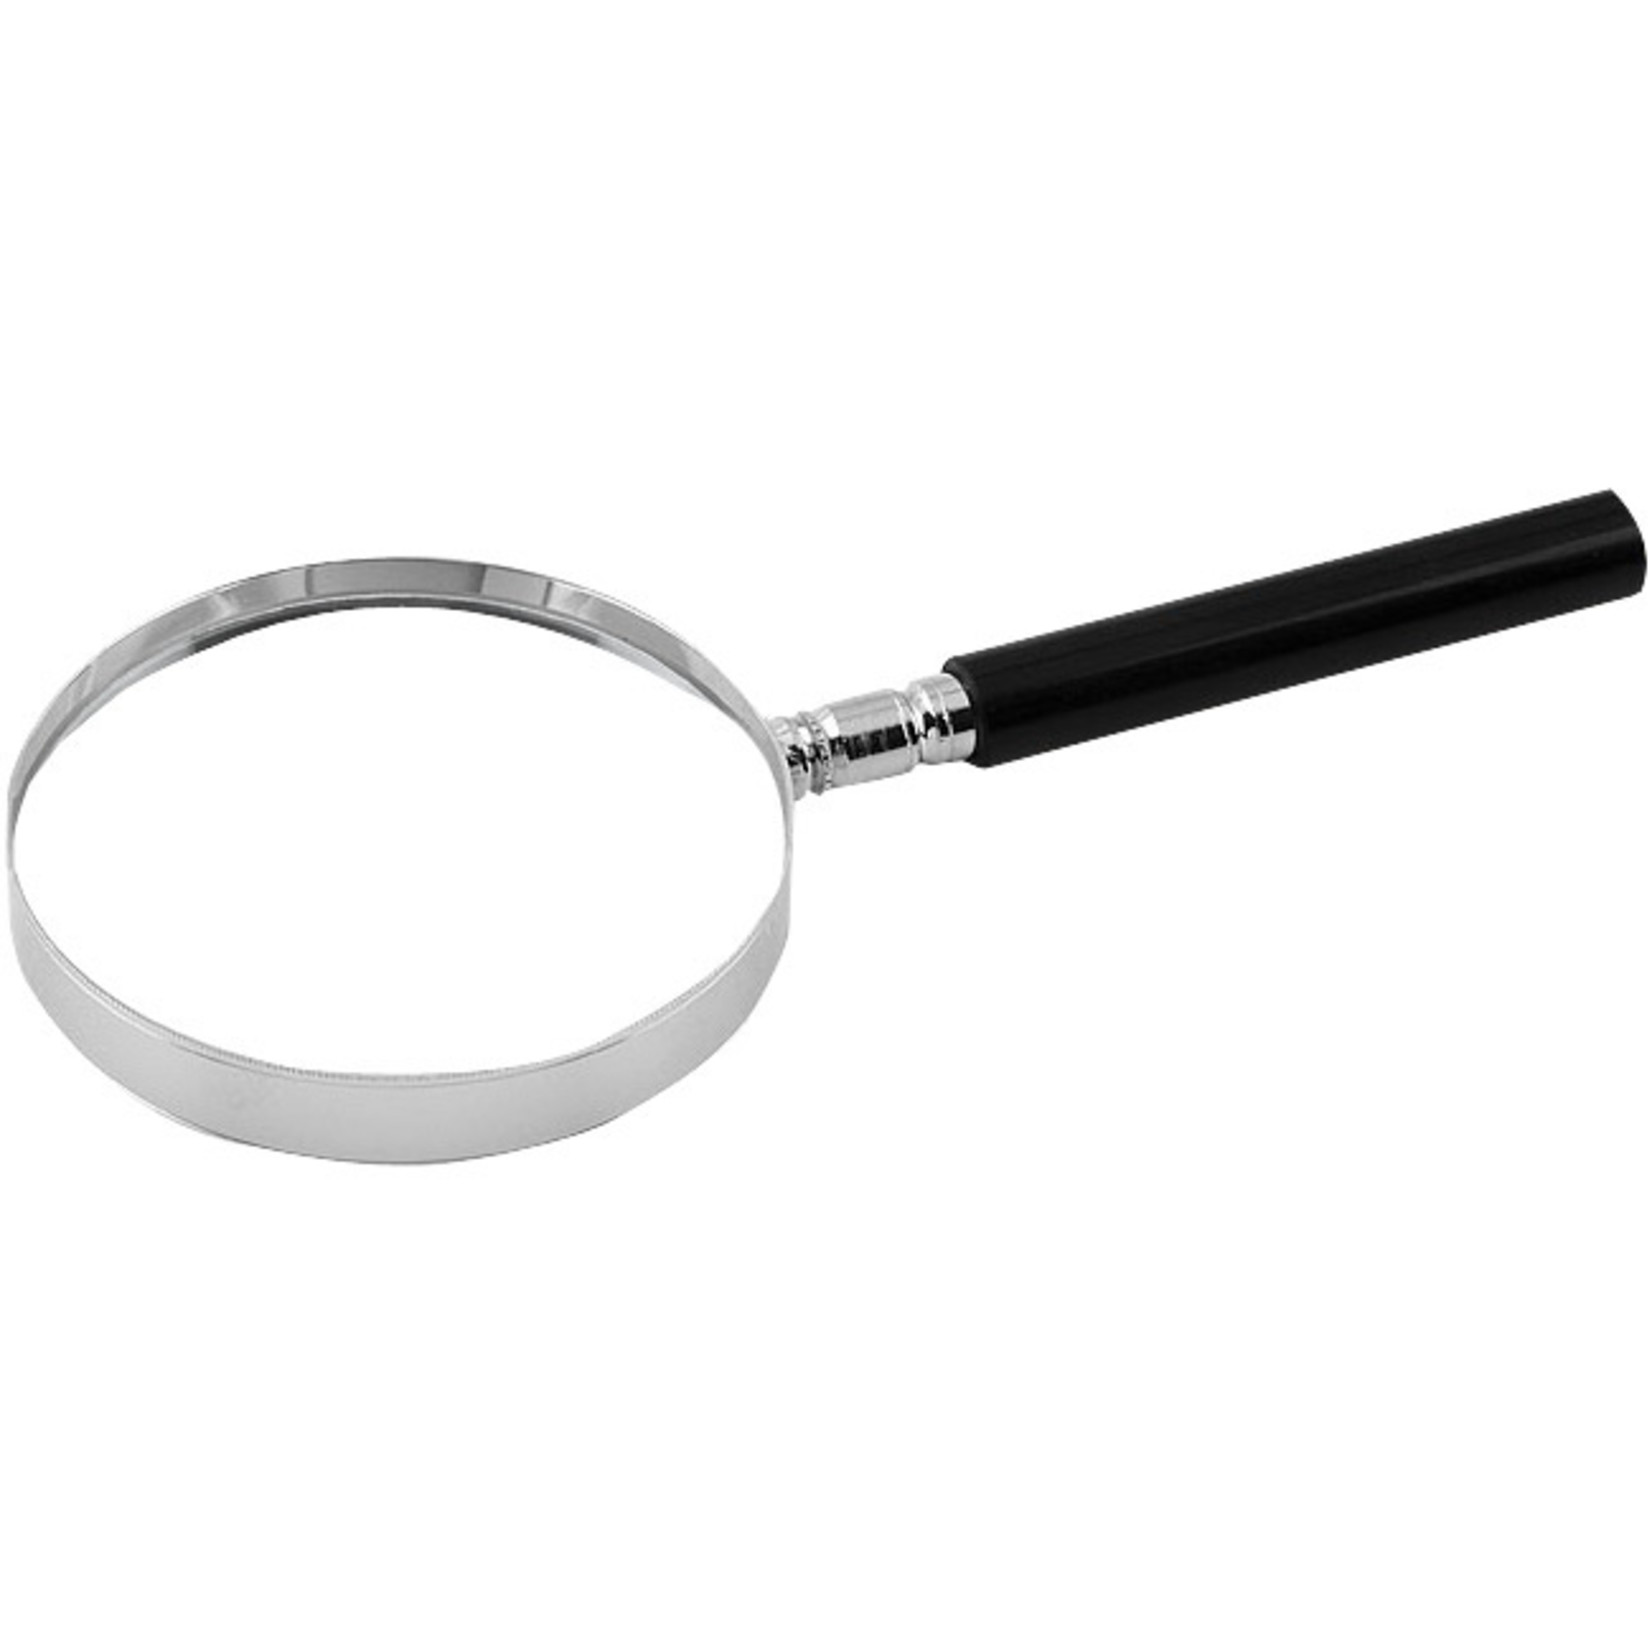 PEAK Hand-held magnifiers 2.5x and 5x